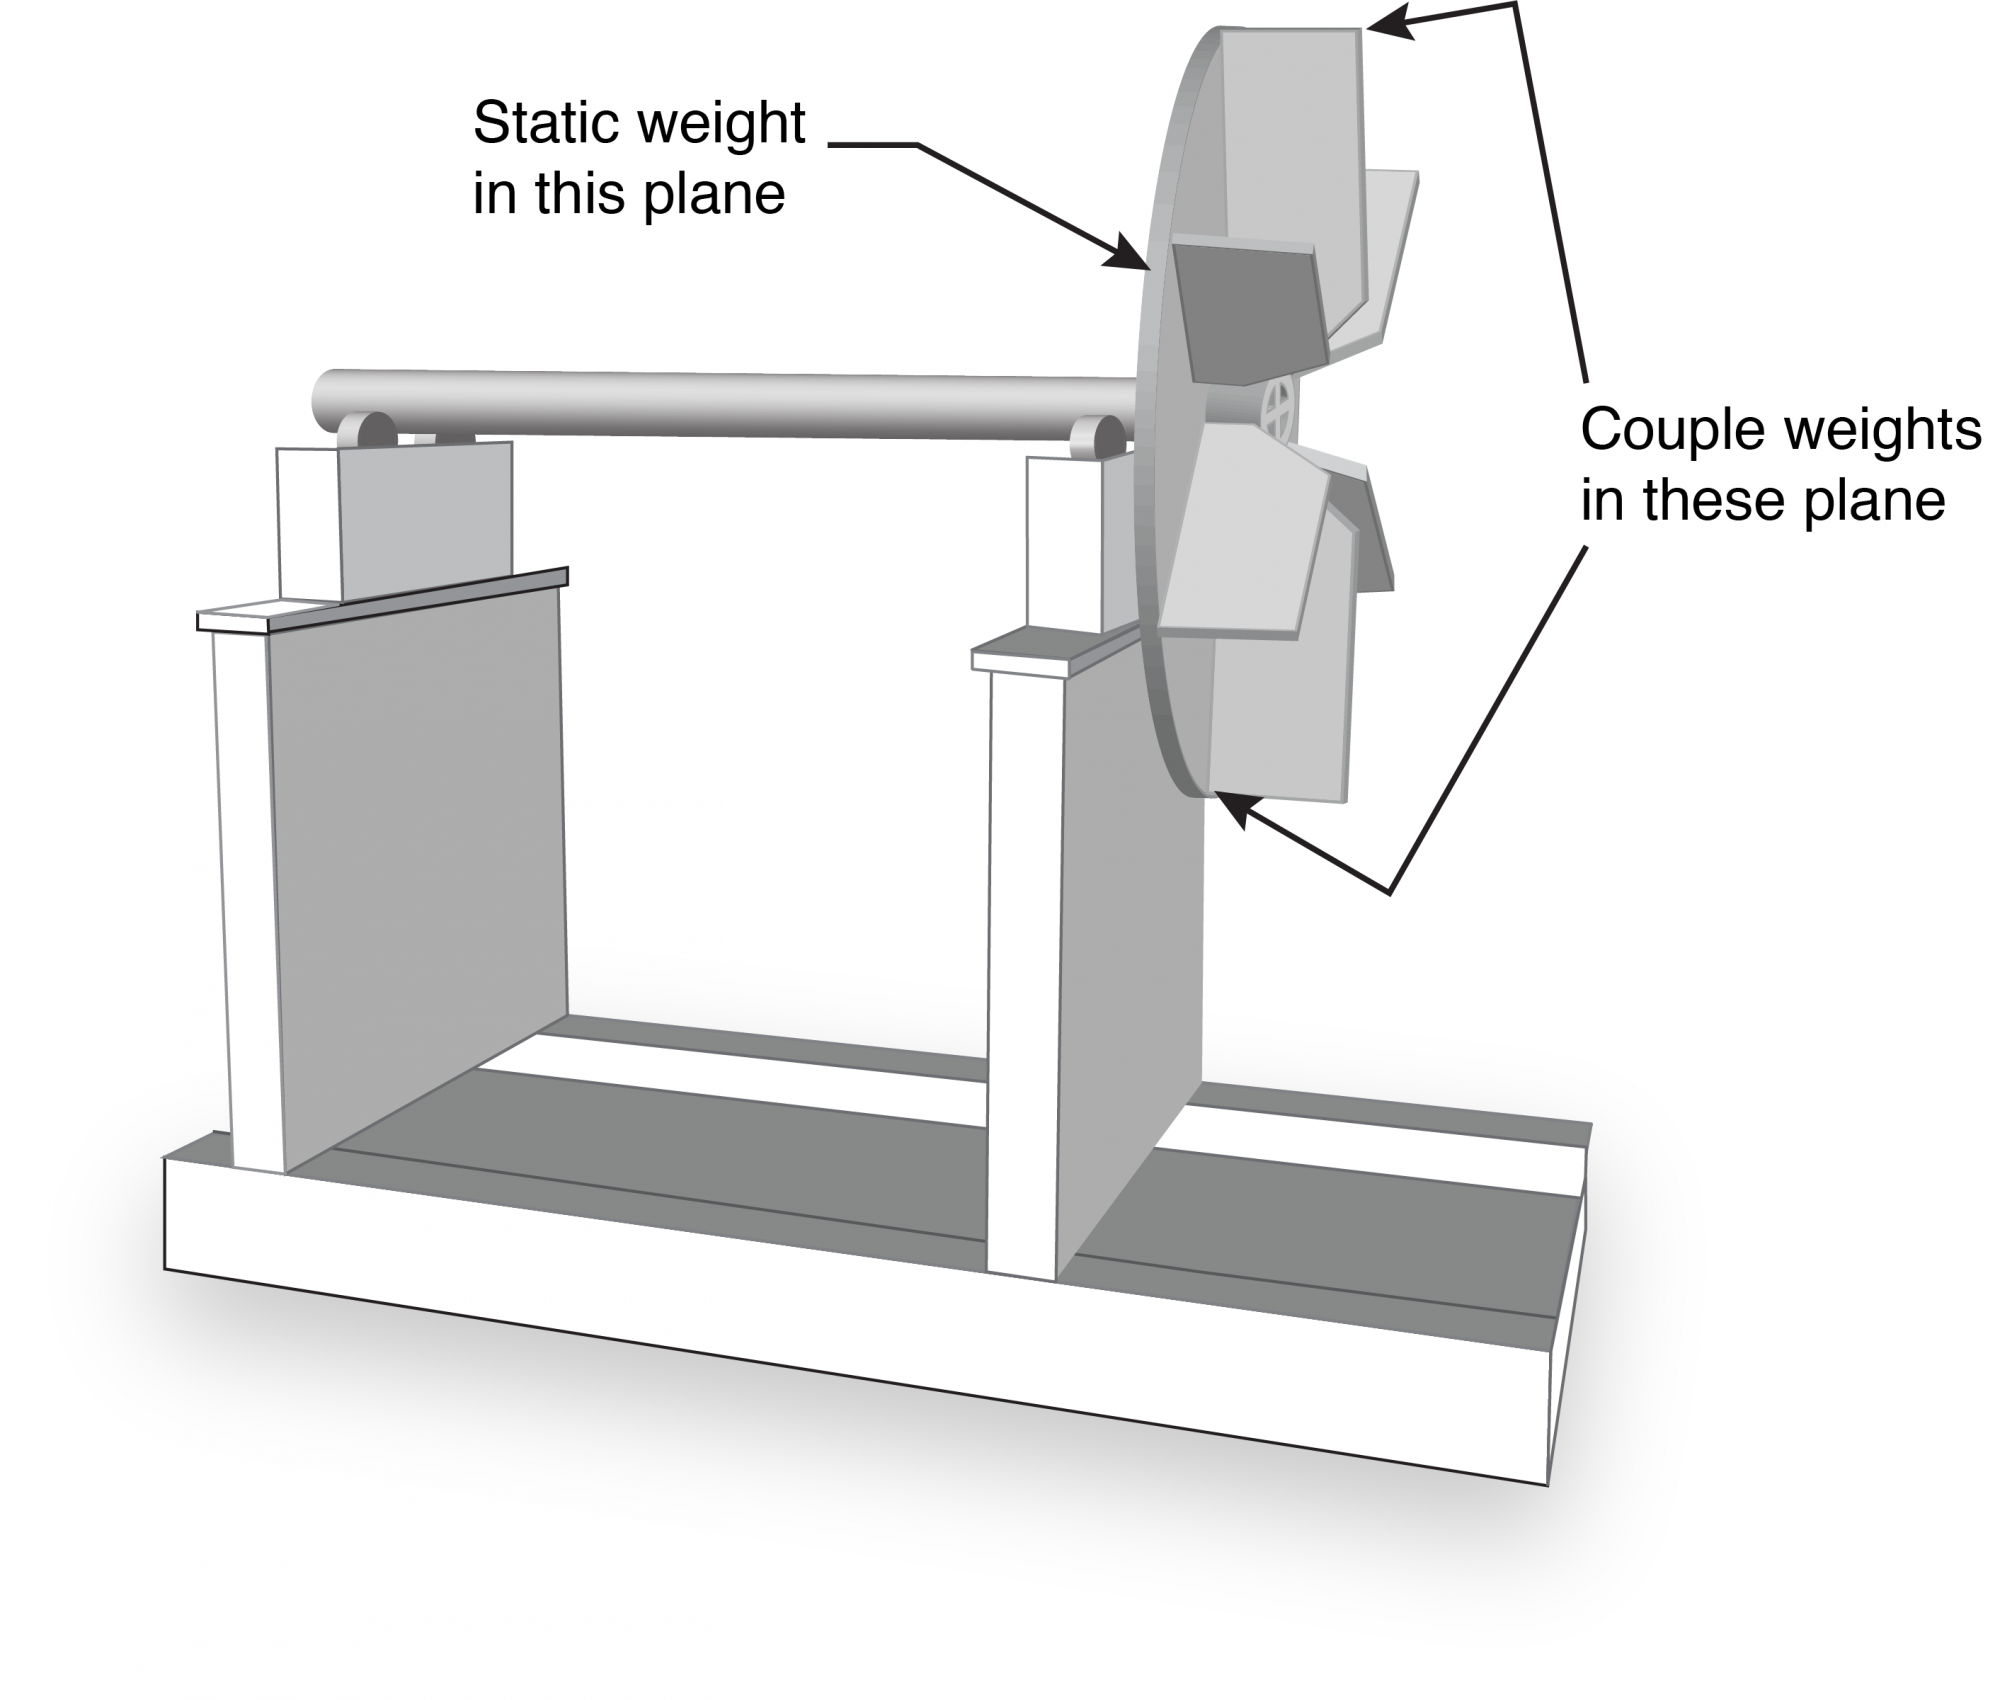 Static-couple  technique for overhung rotors in the balancing machine (Images courtesy of EASA)